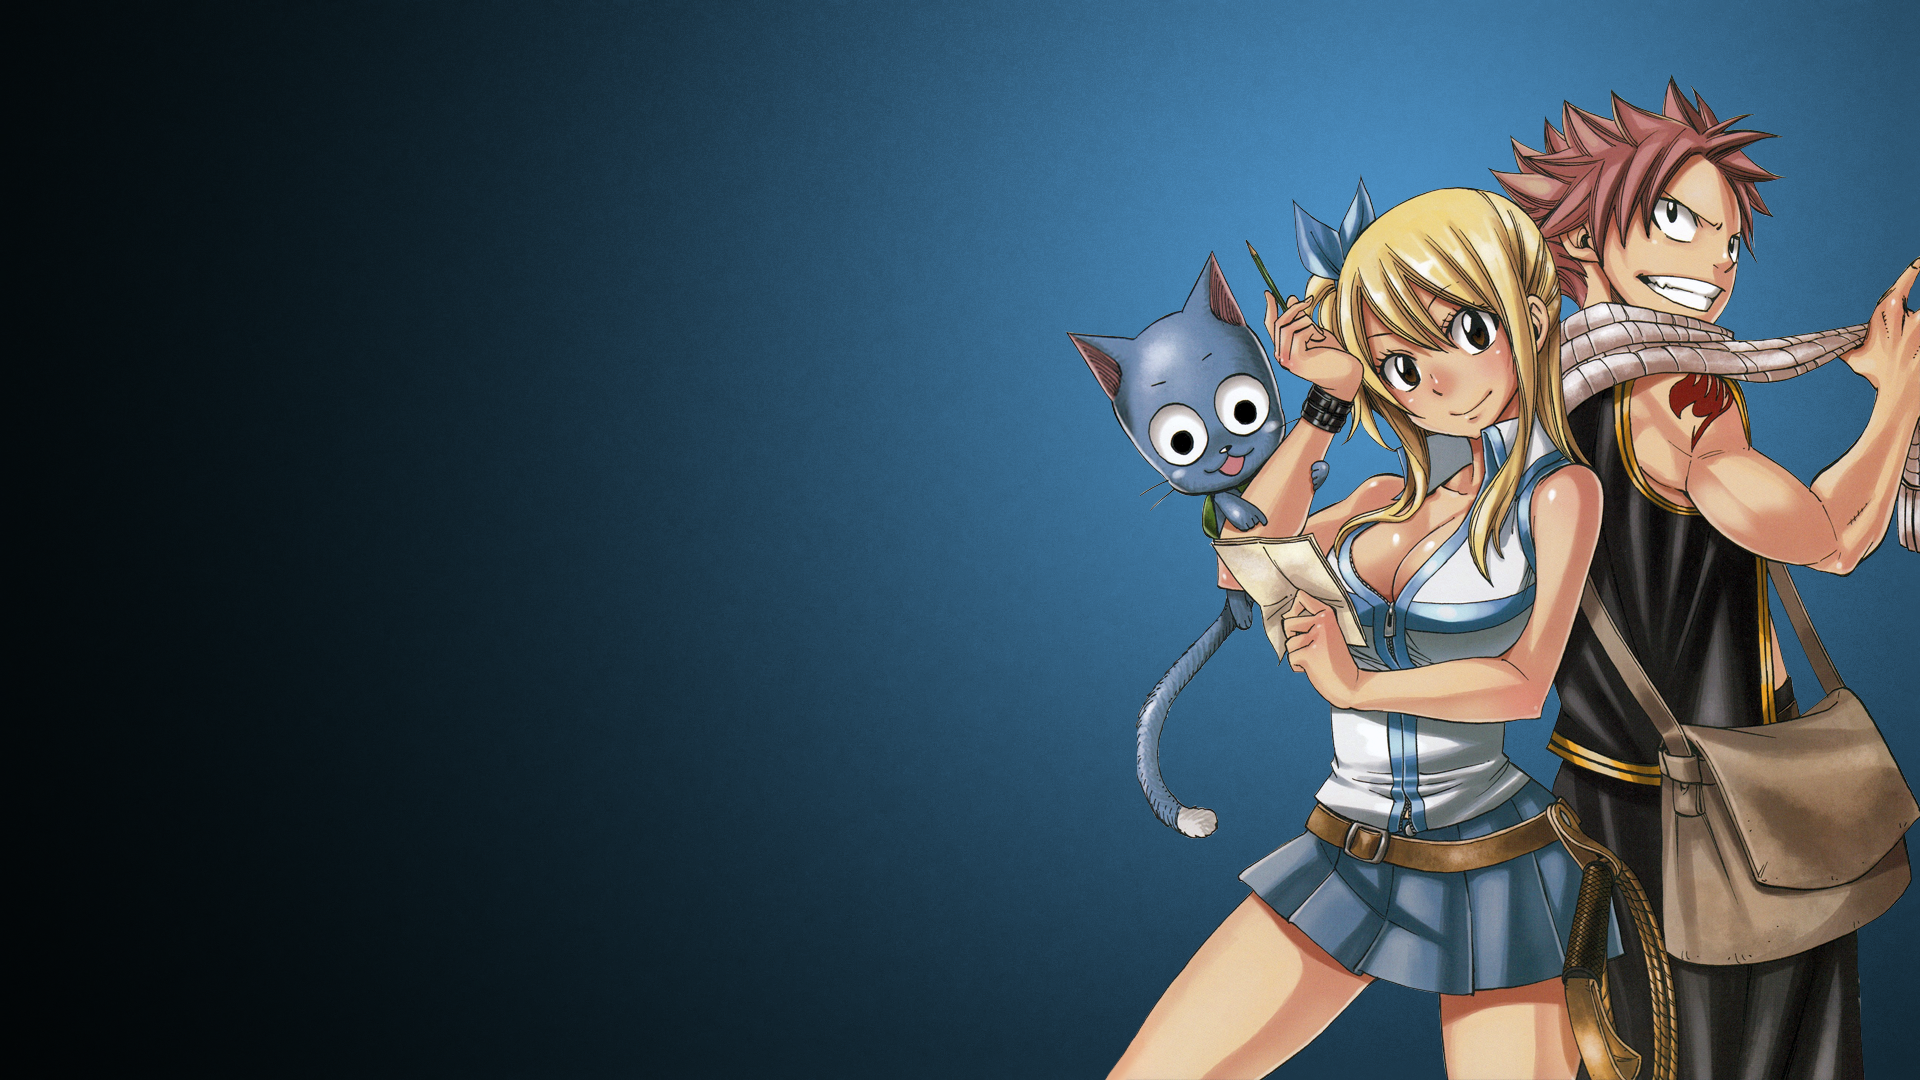 Fairy Tail Computer Wallpapers Desktop Backgrounds 1920x1080 ID